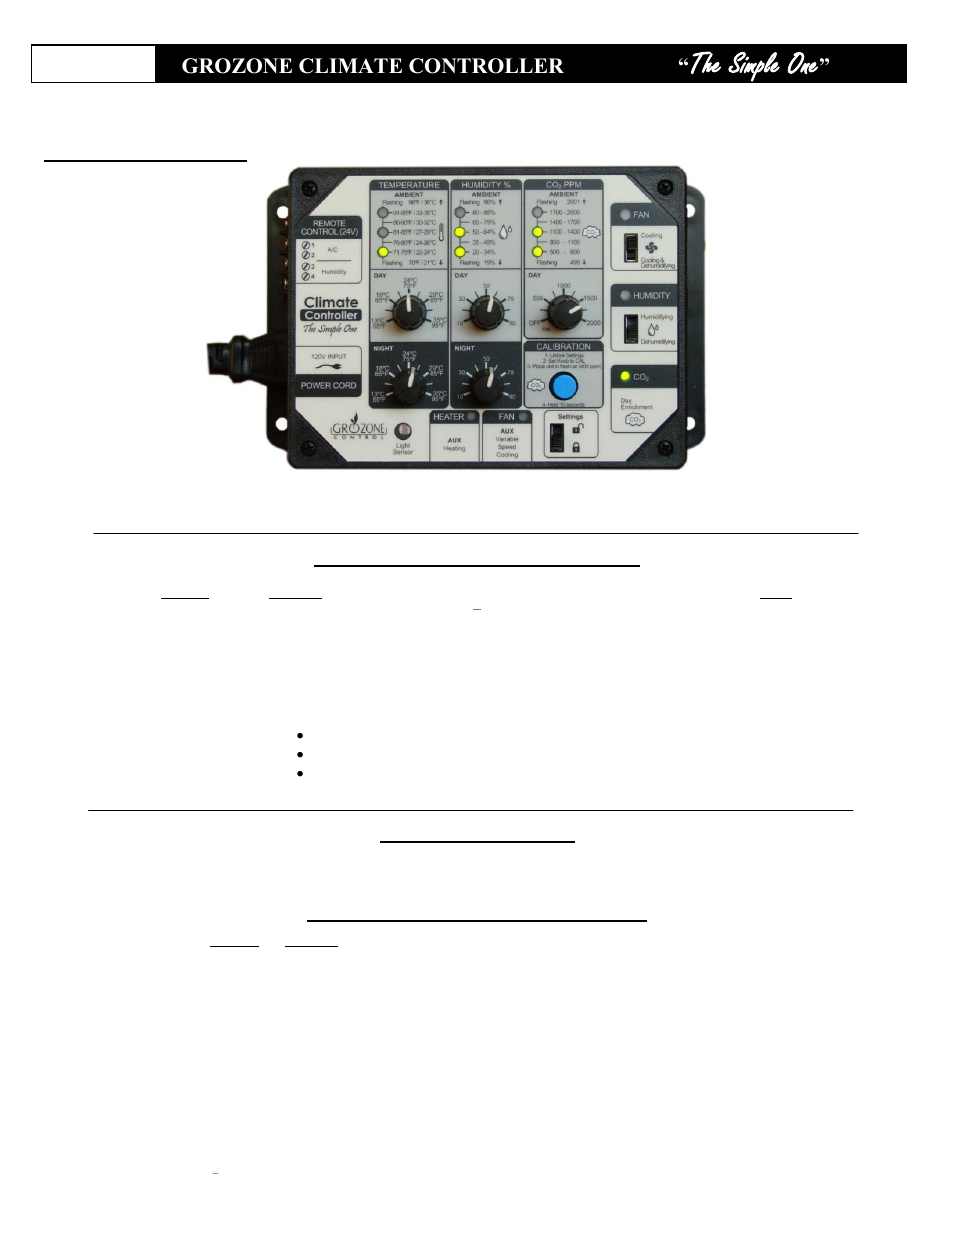 Sunlight Supply Grozone Control SCC1 Temperature, Humidity and CO2 Controller Simple One Series User Manual | 12 pages